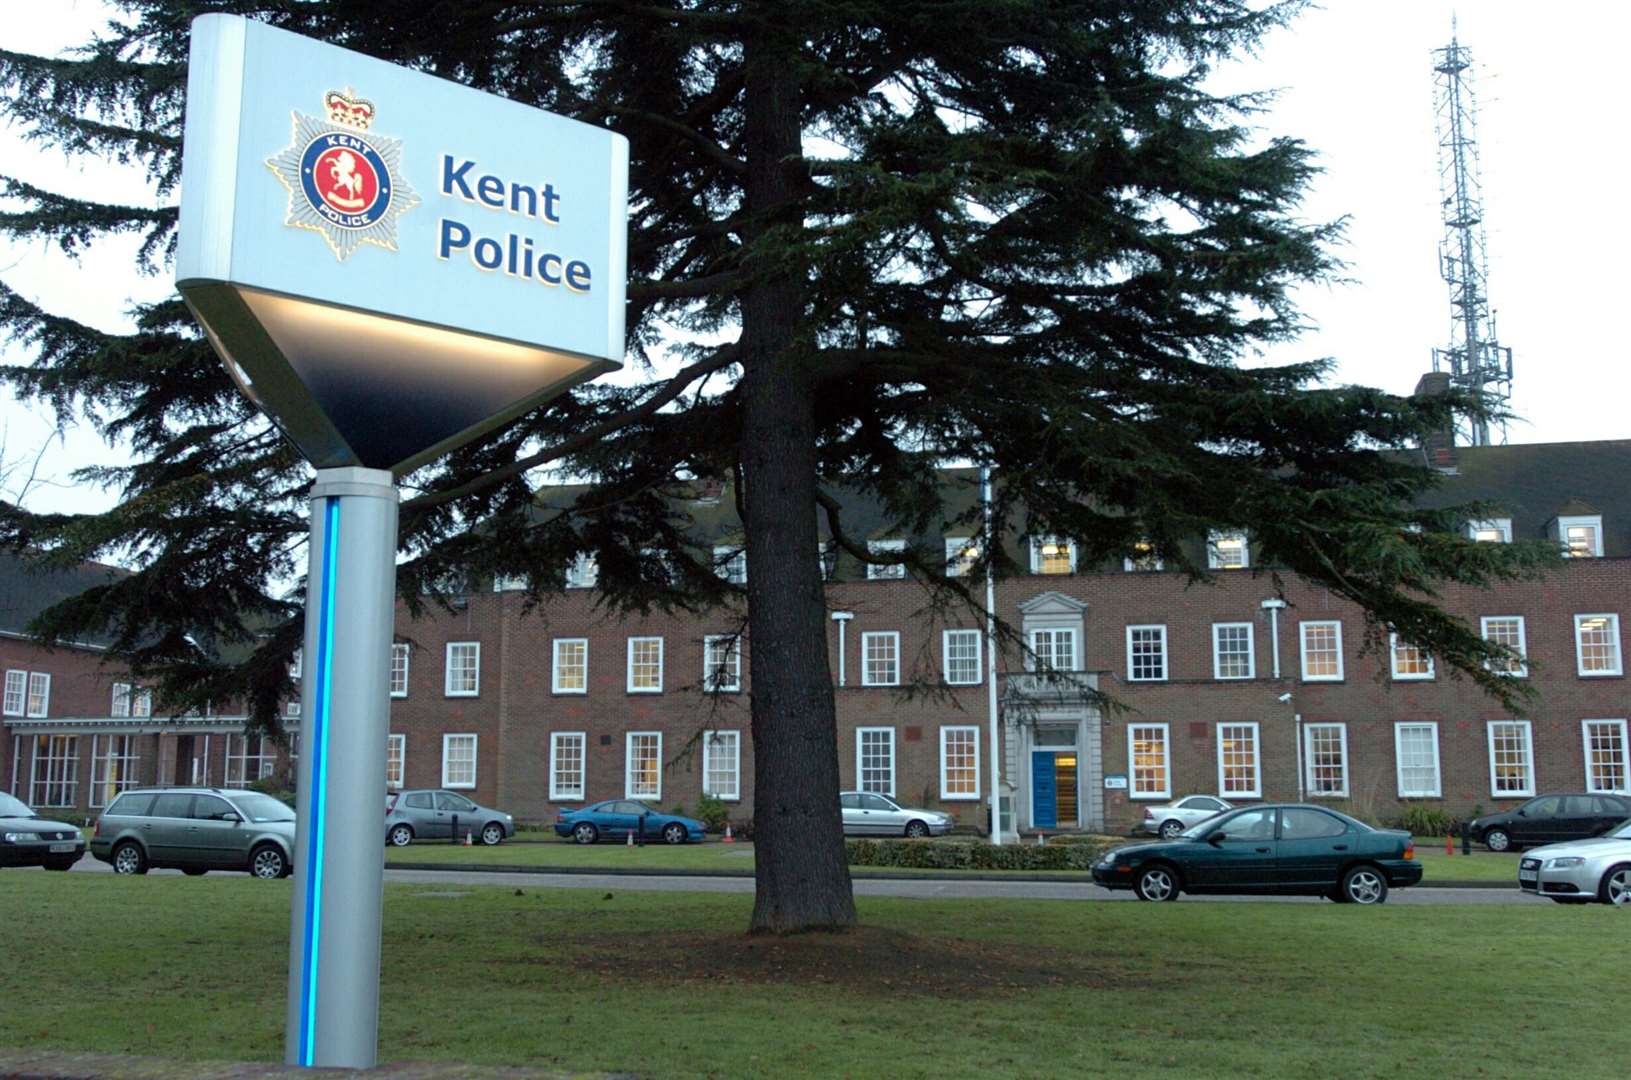 The misconduct hearing took place at Kent Police HQ